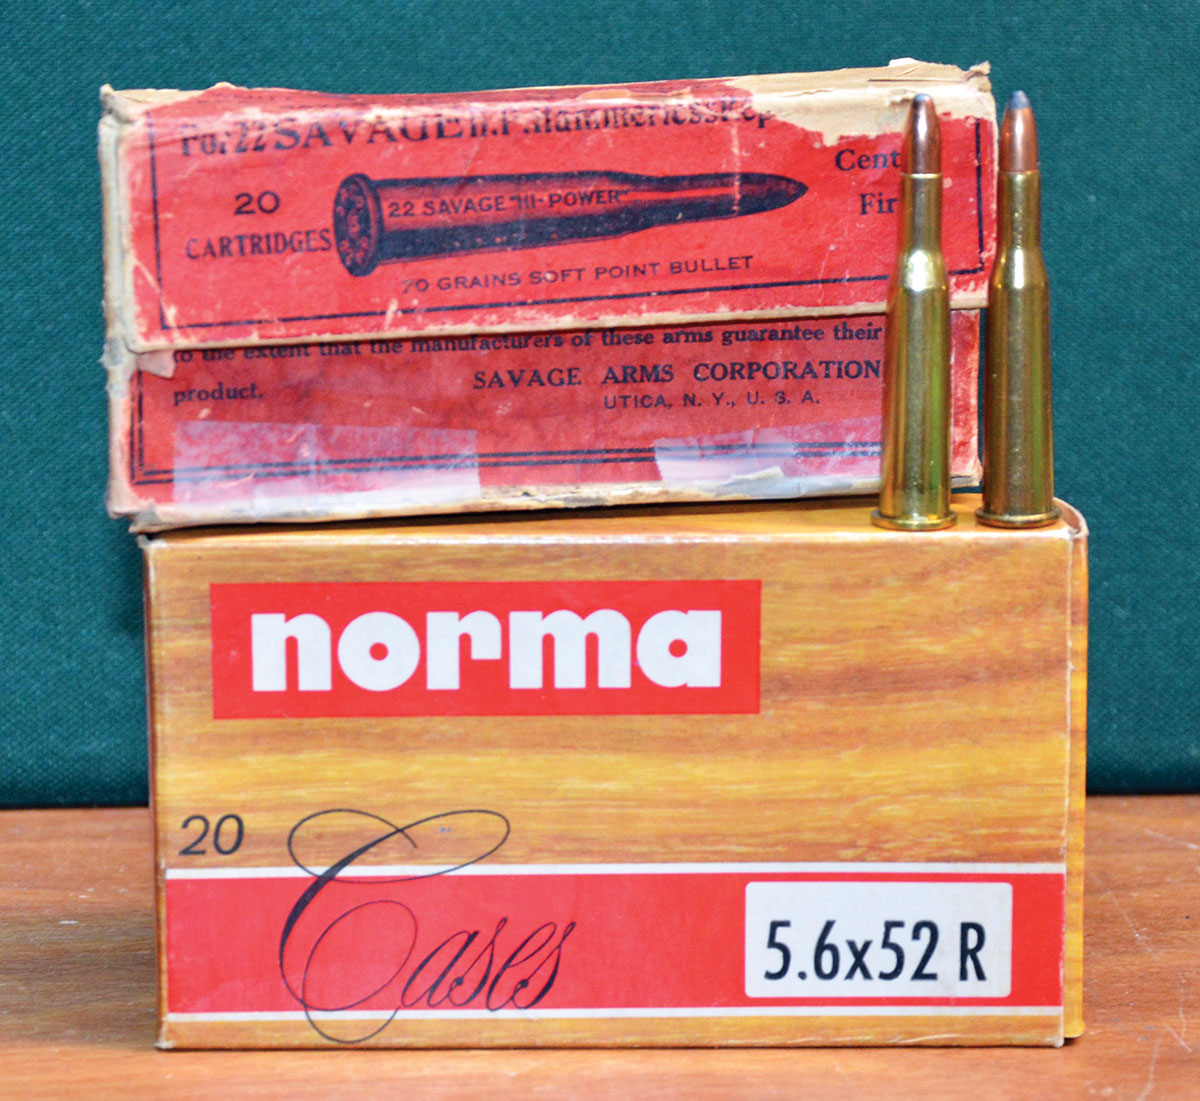 Contrary to what has often been written through the decades, the 22 Hi-Power and the 5.6x52R are not the exact same cartridge with different names. Due to slight dimensional differences in their cases and chambers, 22 Hi-Power ammunition often will not chamber in rifles with the 5.6x52mm chamber, although the opposite usually will.